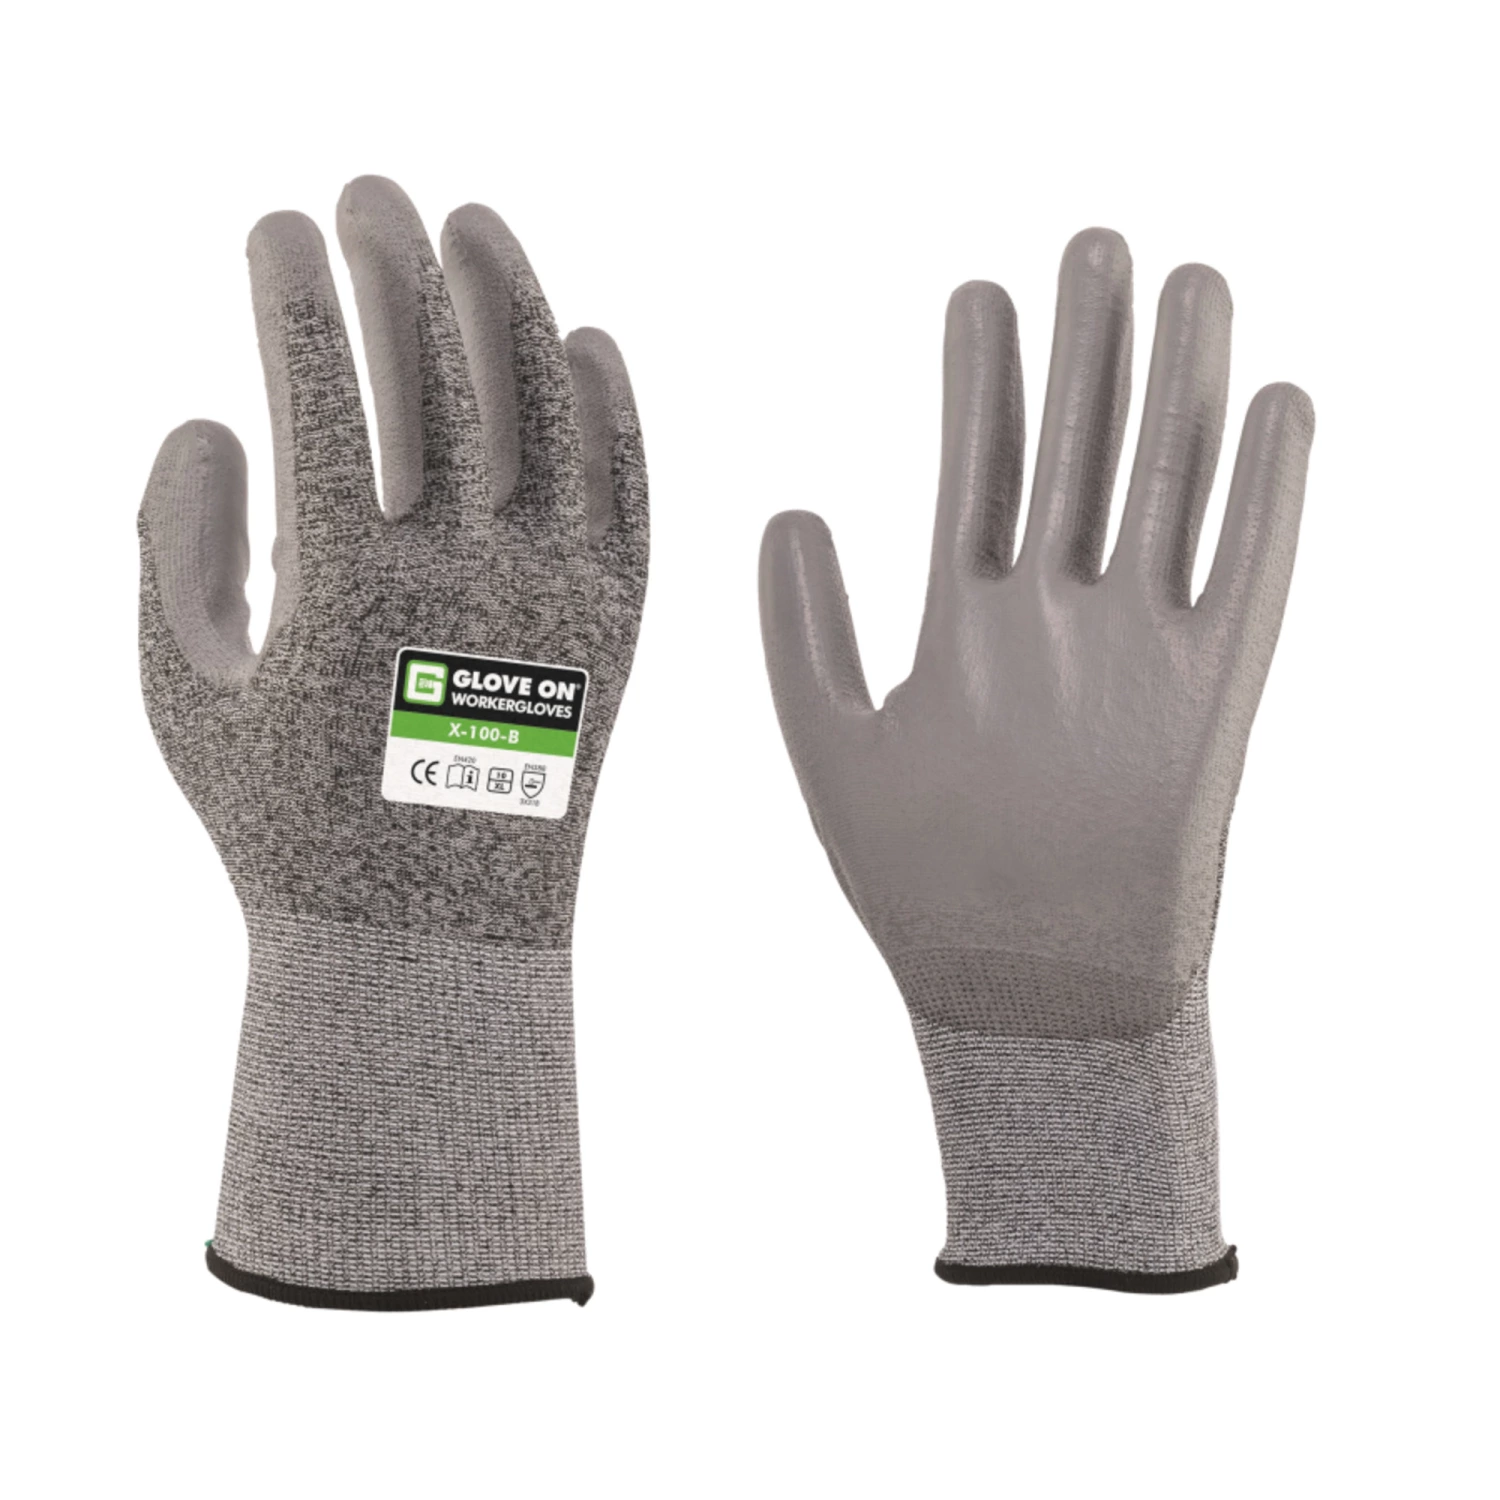 Gant de travail Glove On Protect X 100 B - taille 8